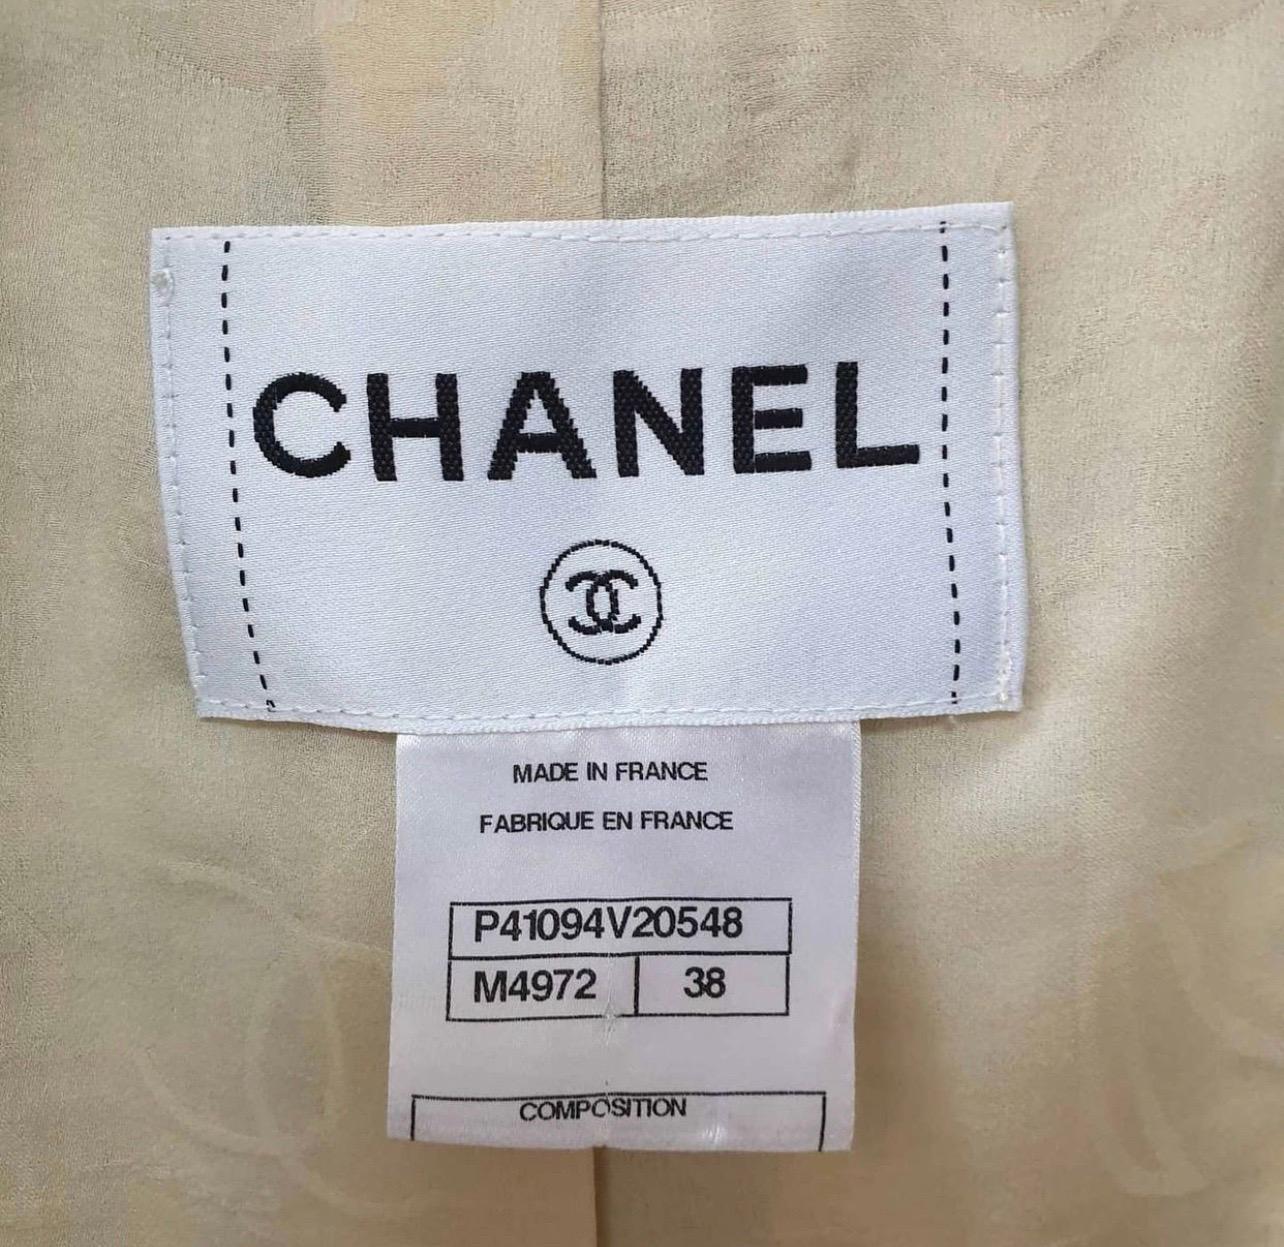  CHANEL yellow multicolor fantasy tweed flower sequins ostrich feather trim jacket  from 2011 Spring/Summer Runway collection

Multicolor fantasy tweed jacket features two front pockets at waist, CHANEL logo zip closures at center front, a CC logo